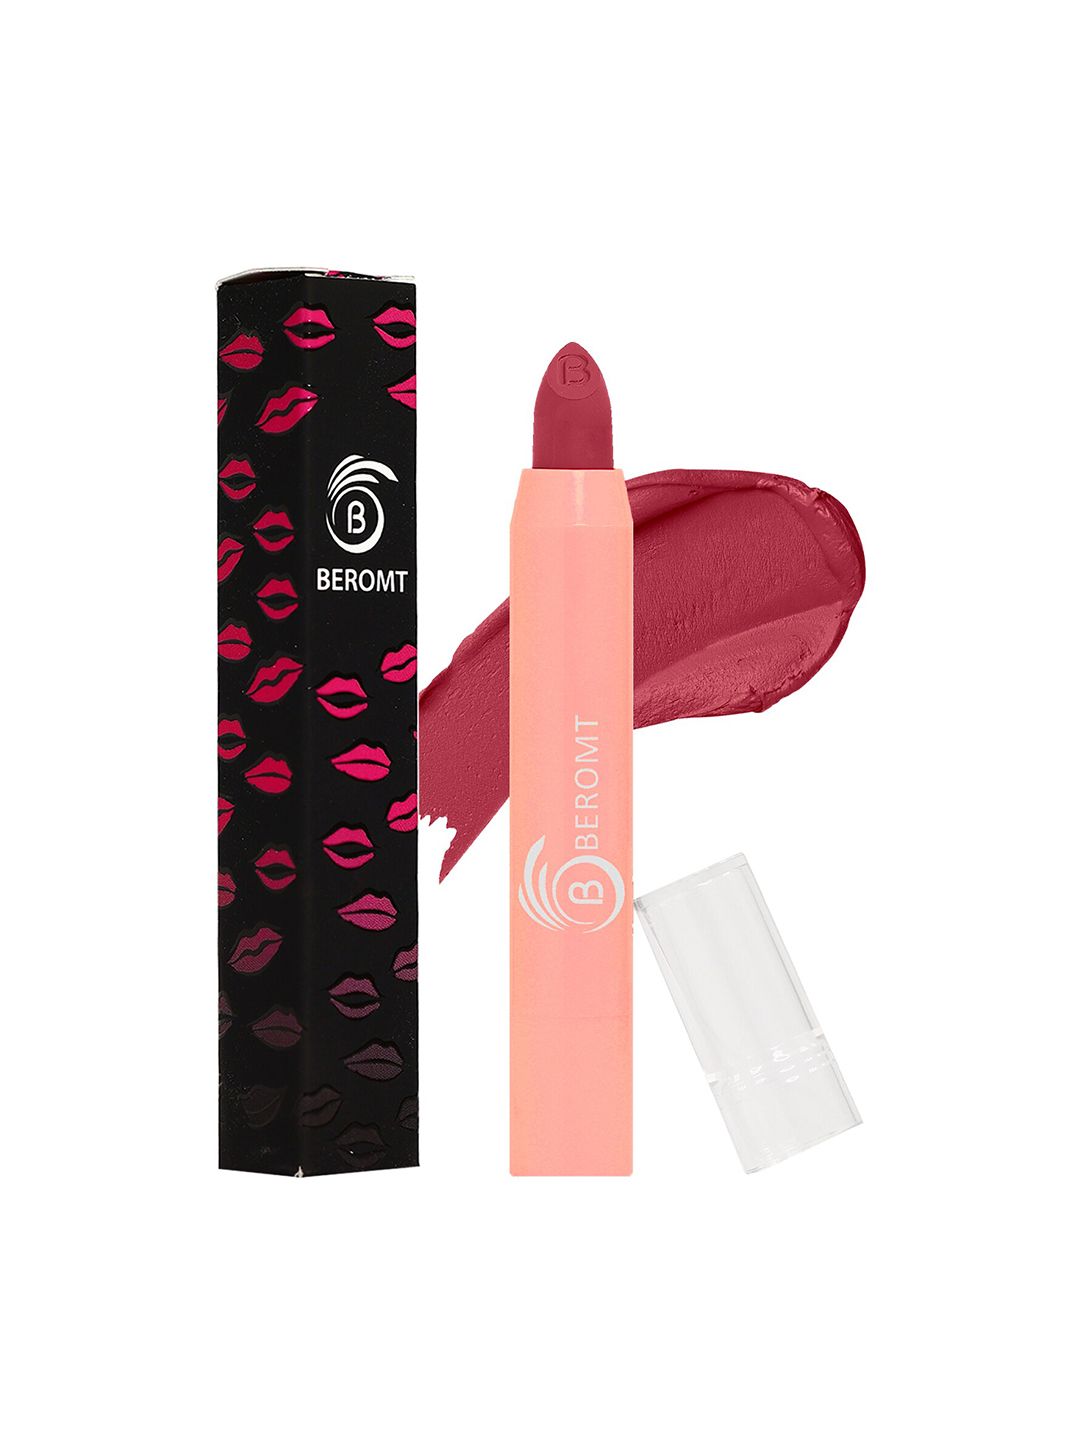 BEROMT Smudge Proof Perfect Pout Long-Lasting Matte Lip Crayon - Casual Trip BLC15 Price in India